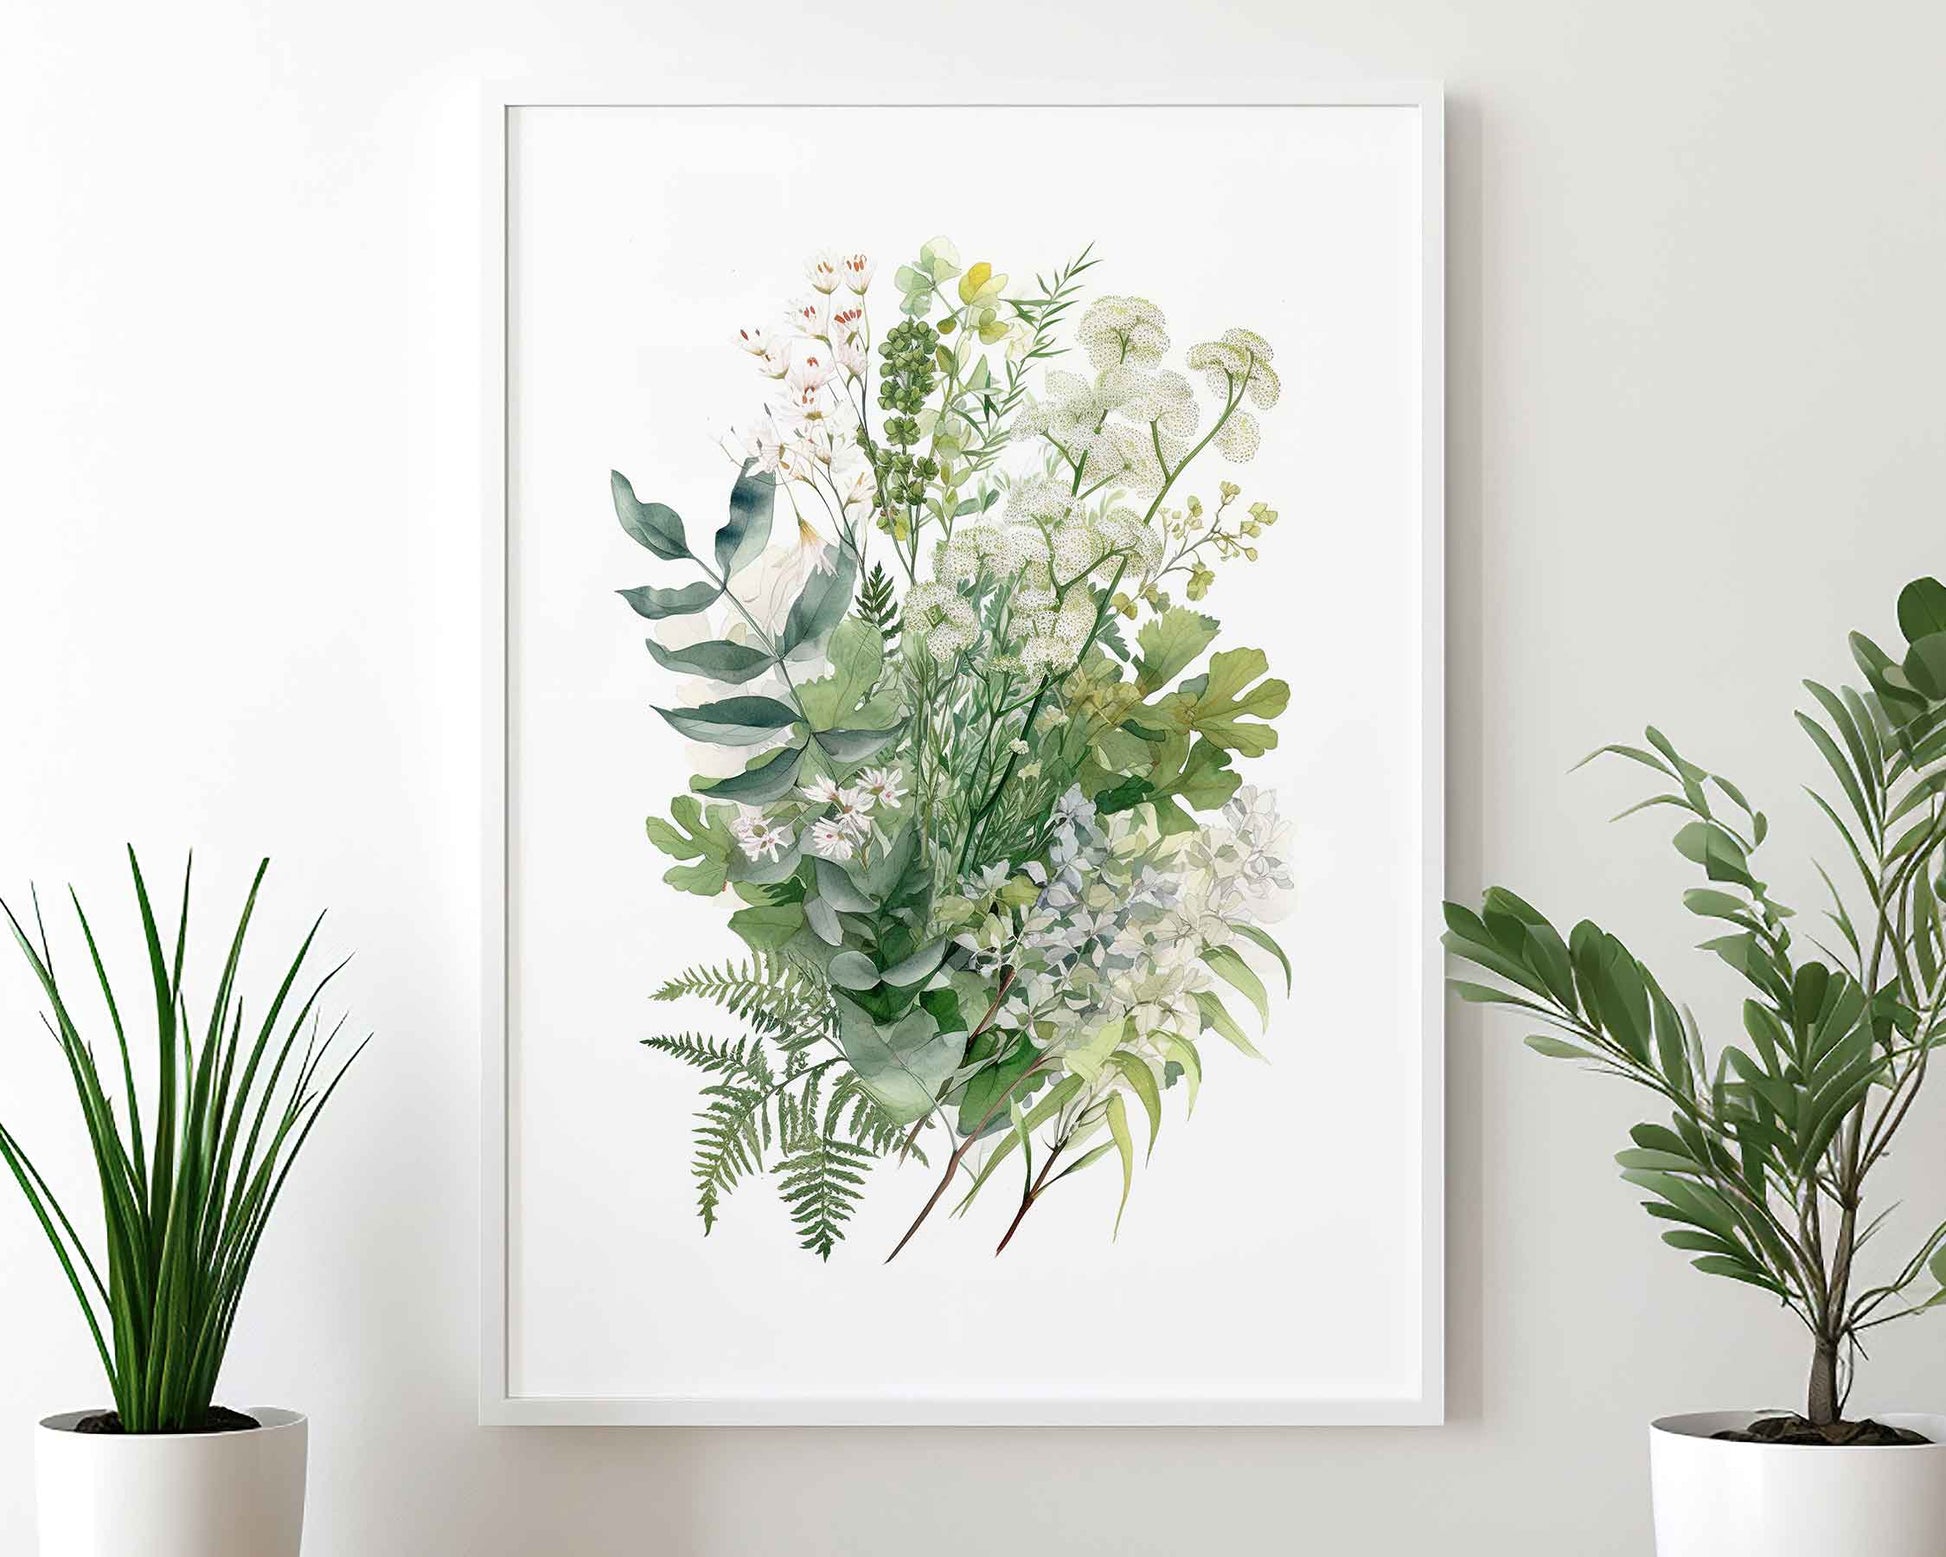 Framed Image of Botanical Art Wall Poster of Eucalyptus and Fern Leaf Paintings